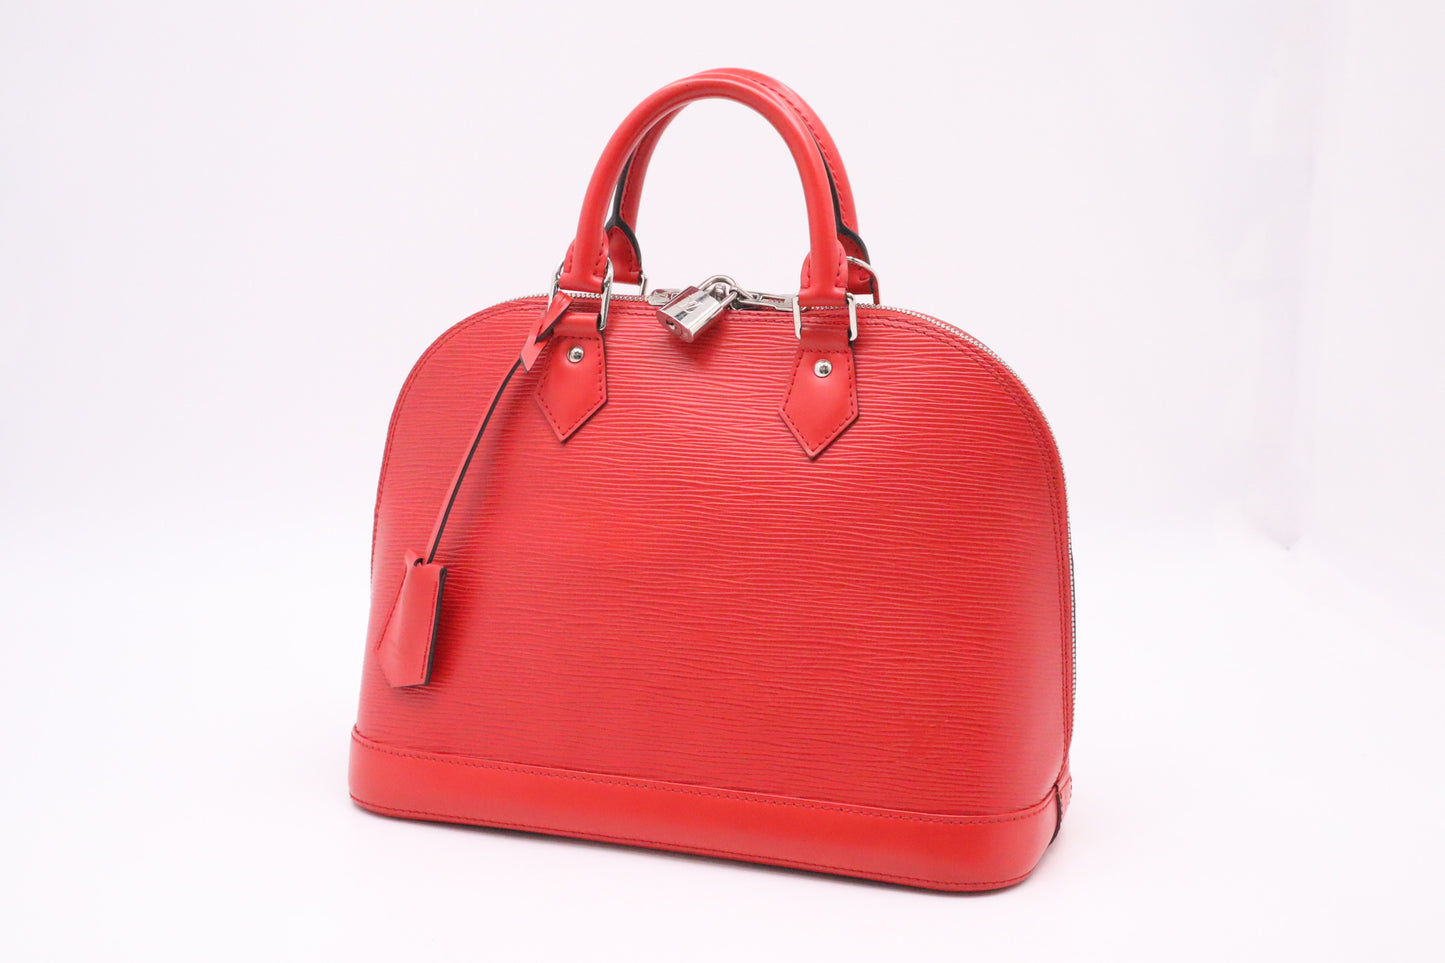 Louis Vuitton Alma PM in Piment Red Epi Leather